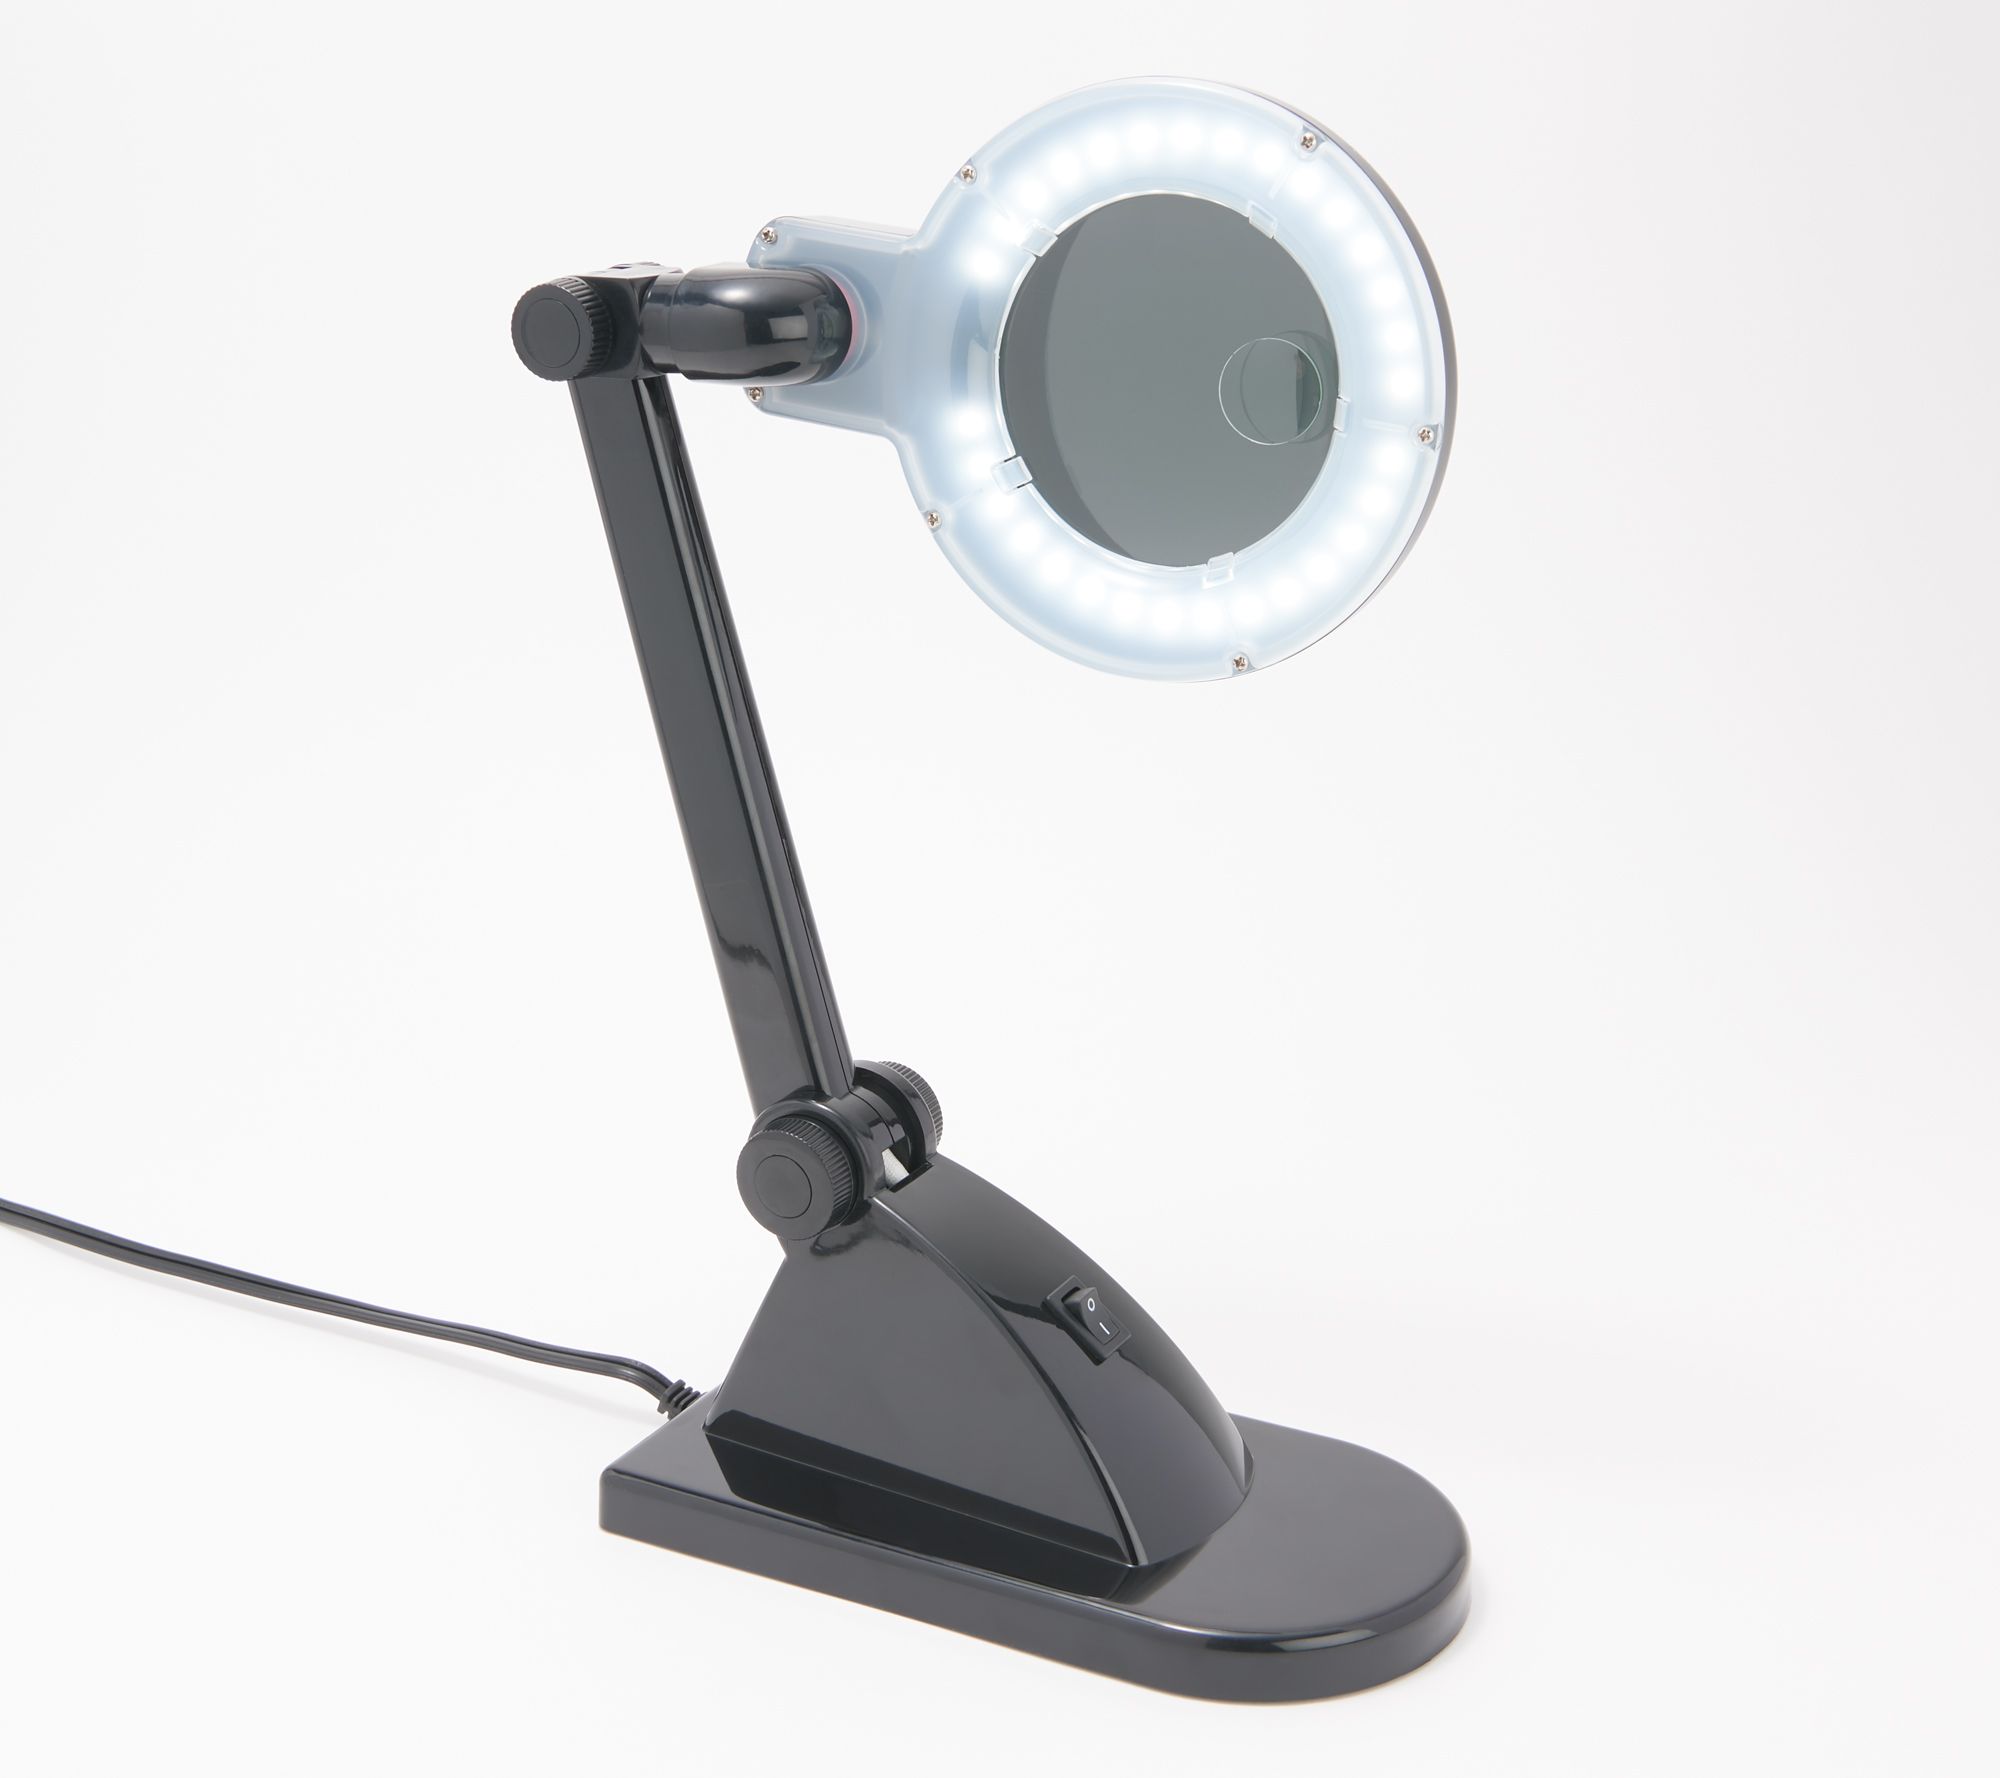 Magnifying Lamp Hands-Free Adjustable Arm Magnifier for Close Work